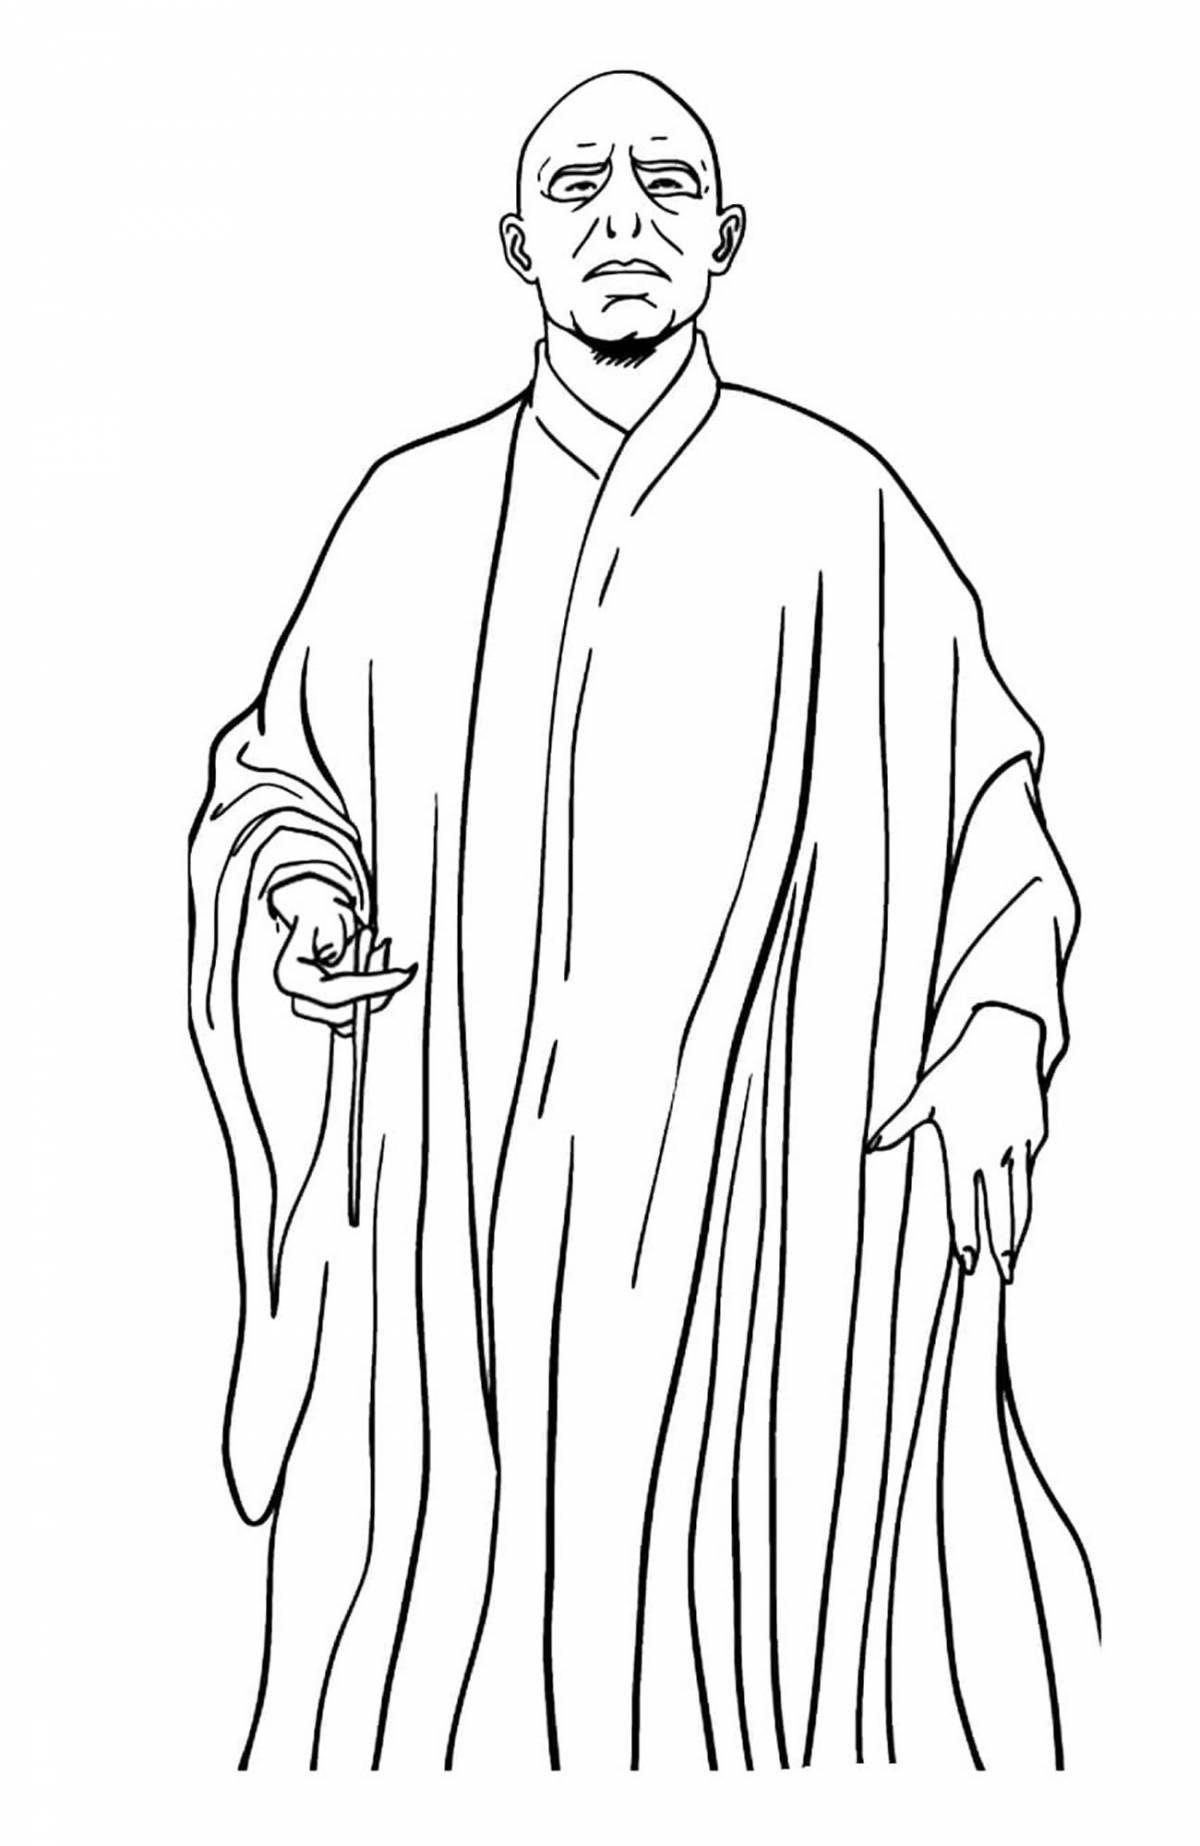 Colouring dazzling voldemort